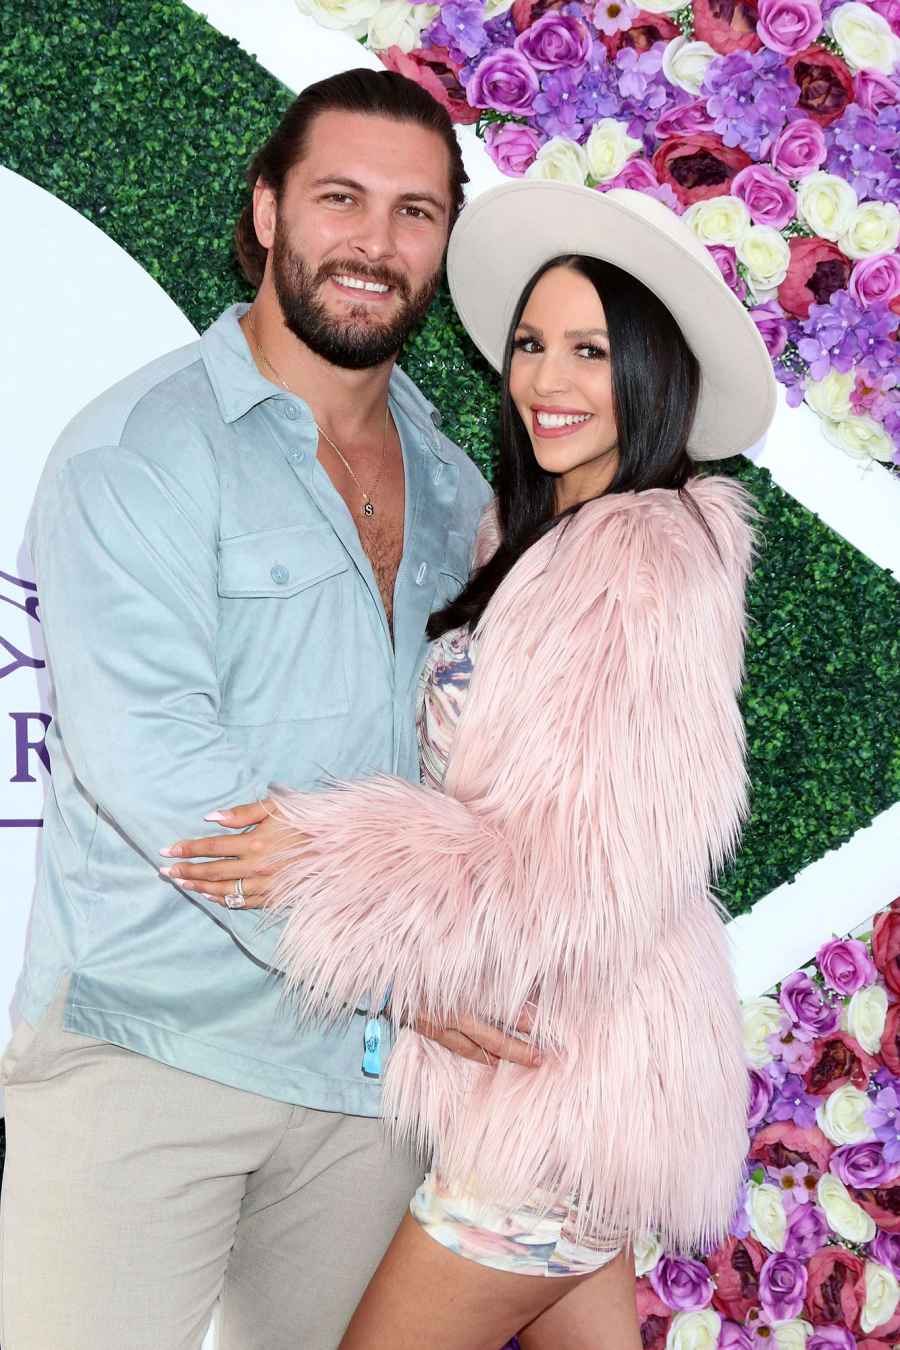 Scheana Shay Helped Fiance Brock Davies See His Ex-Wife's Perspective